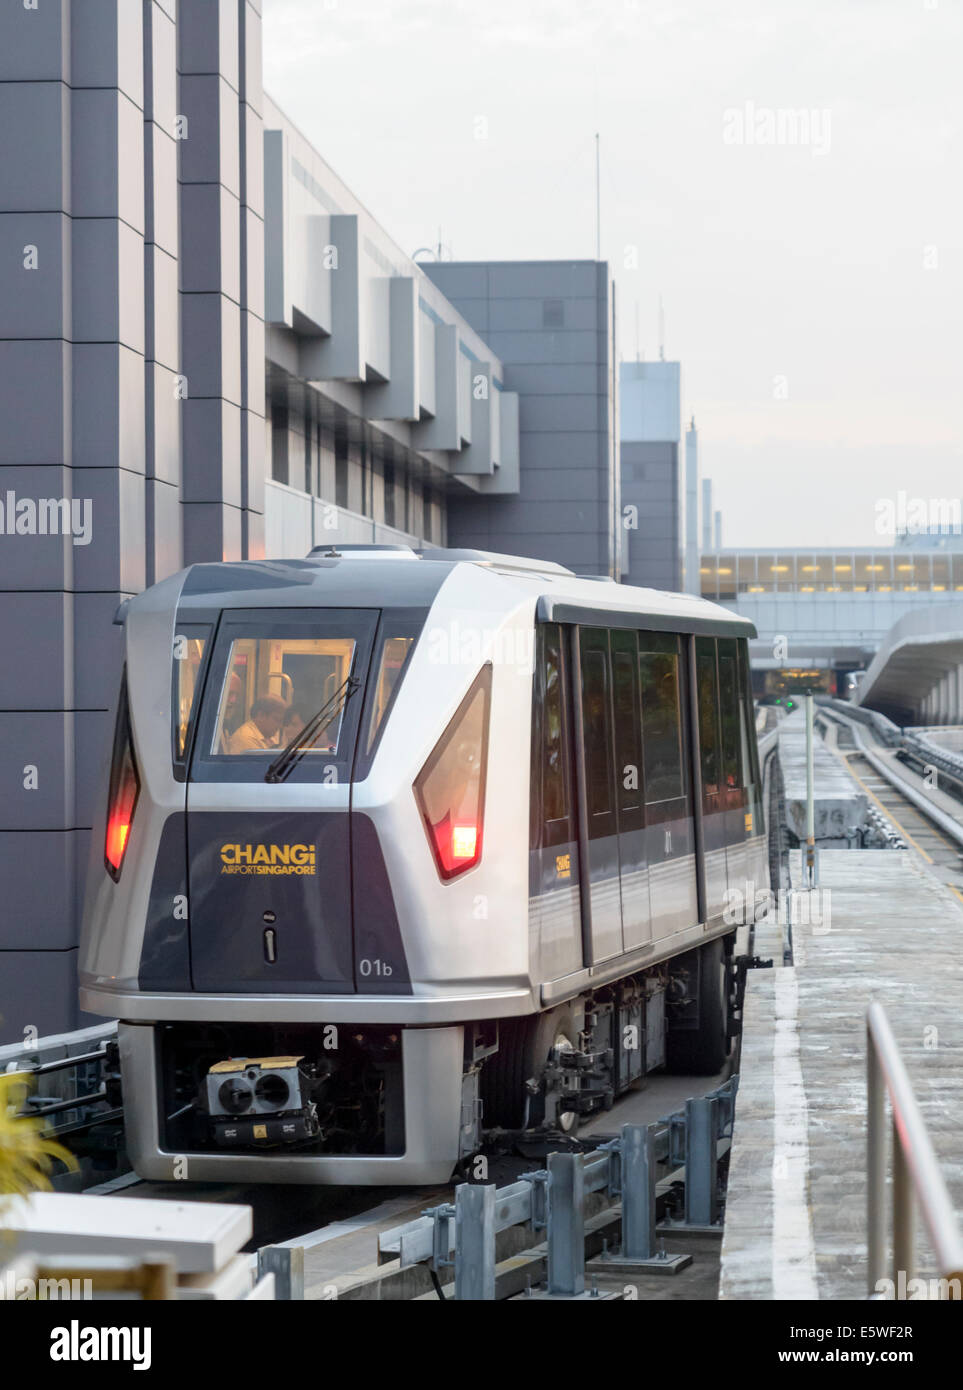 Driverless train, connecting the terminals of Changi Airport, Singapore Stock Photo